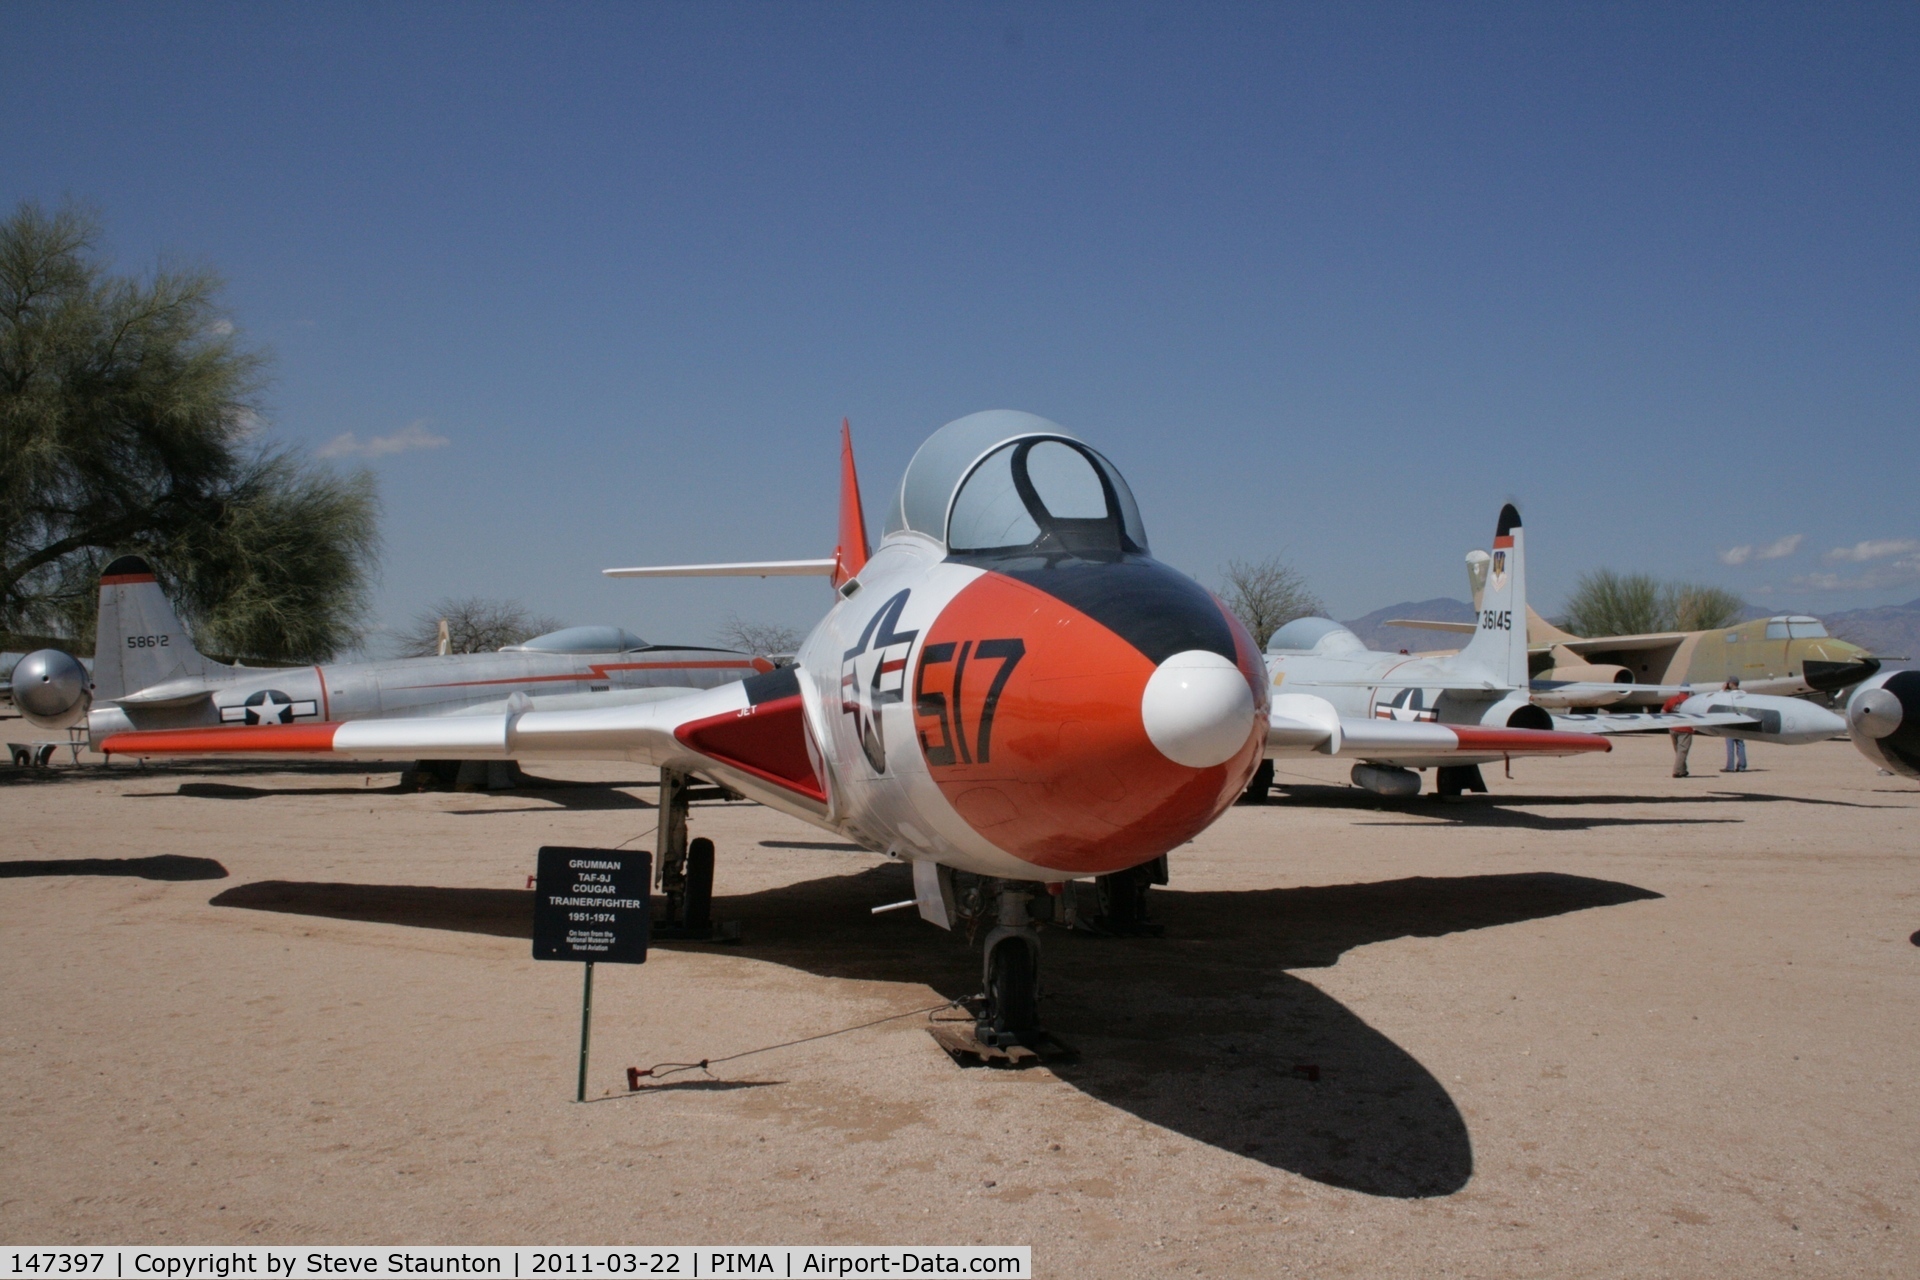 147397, 1962 Grumman TF-9J Cougar C/N 367, Taken at Pima Air and Space Museum, in March 2011 whilst on an Aeroprint Aviation tour